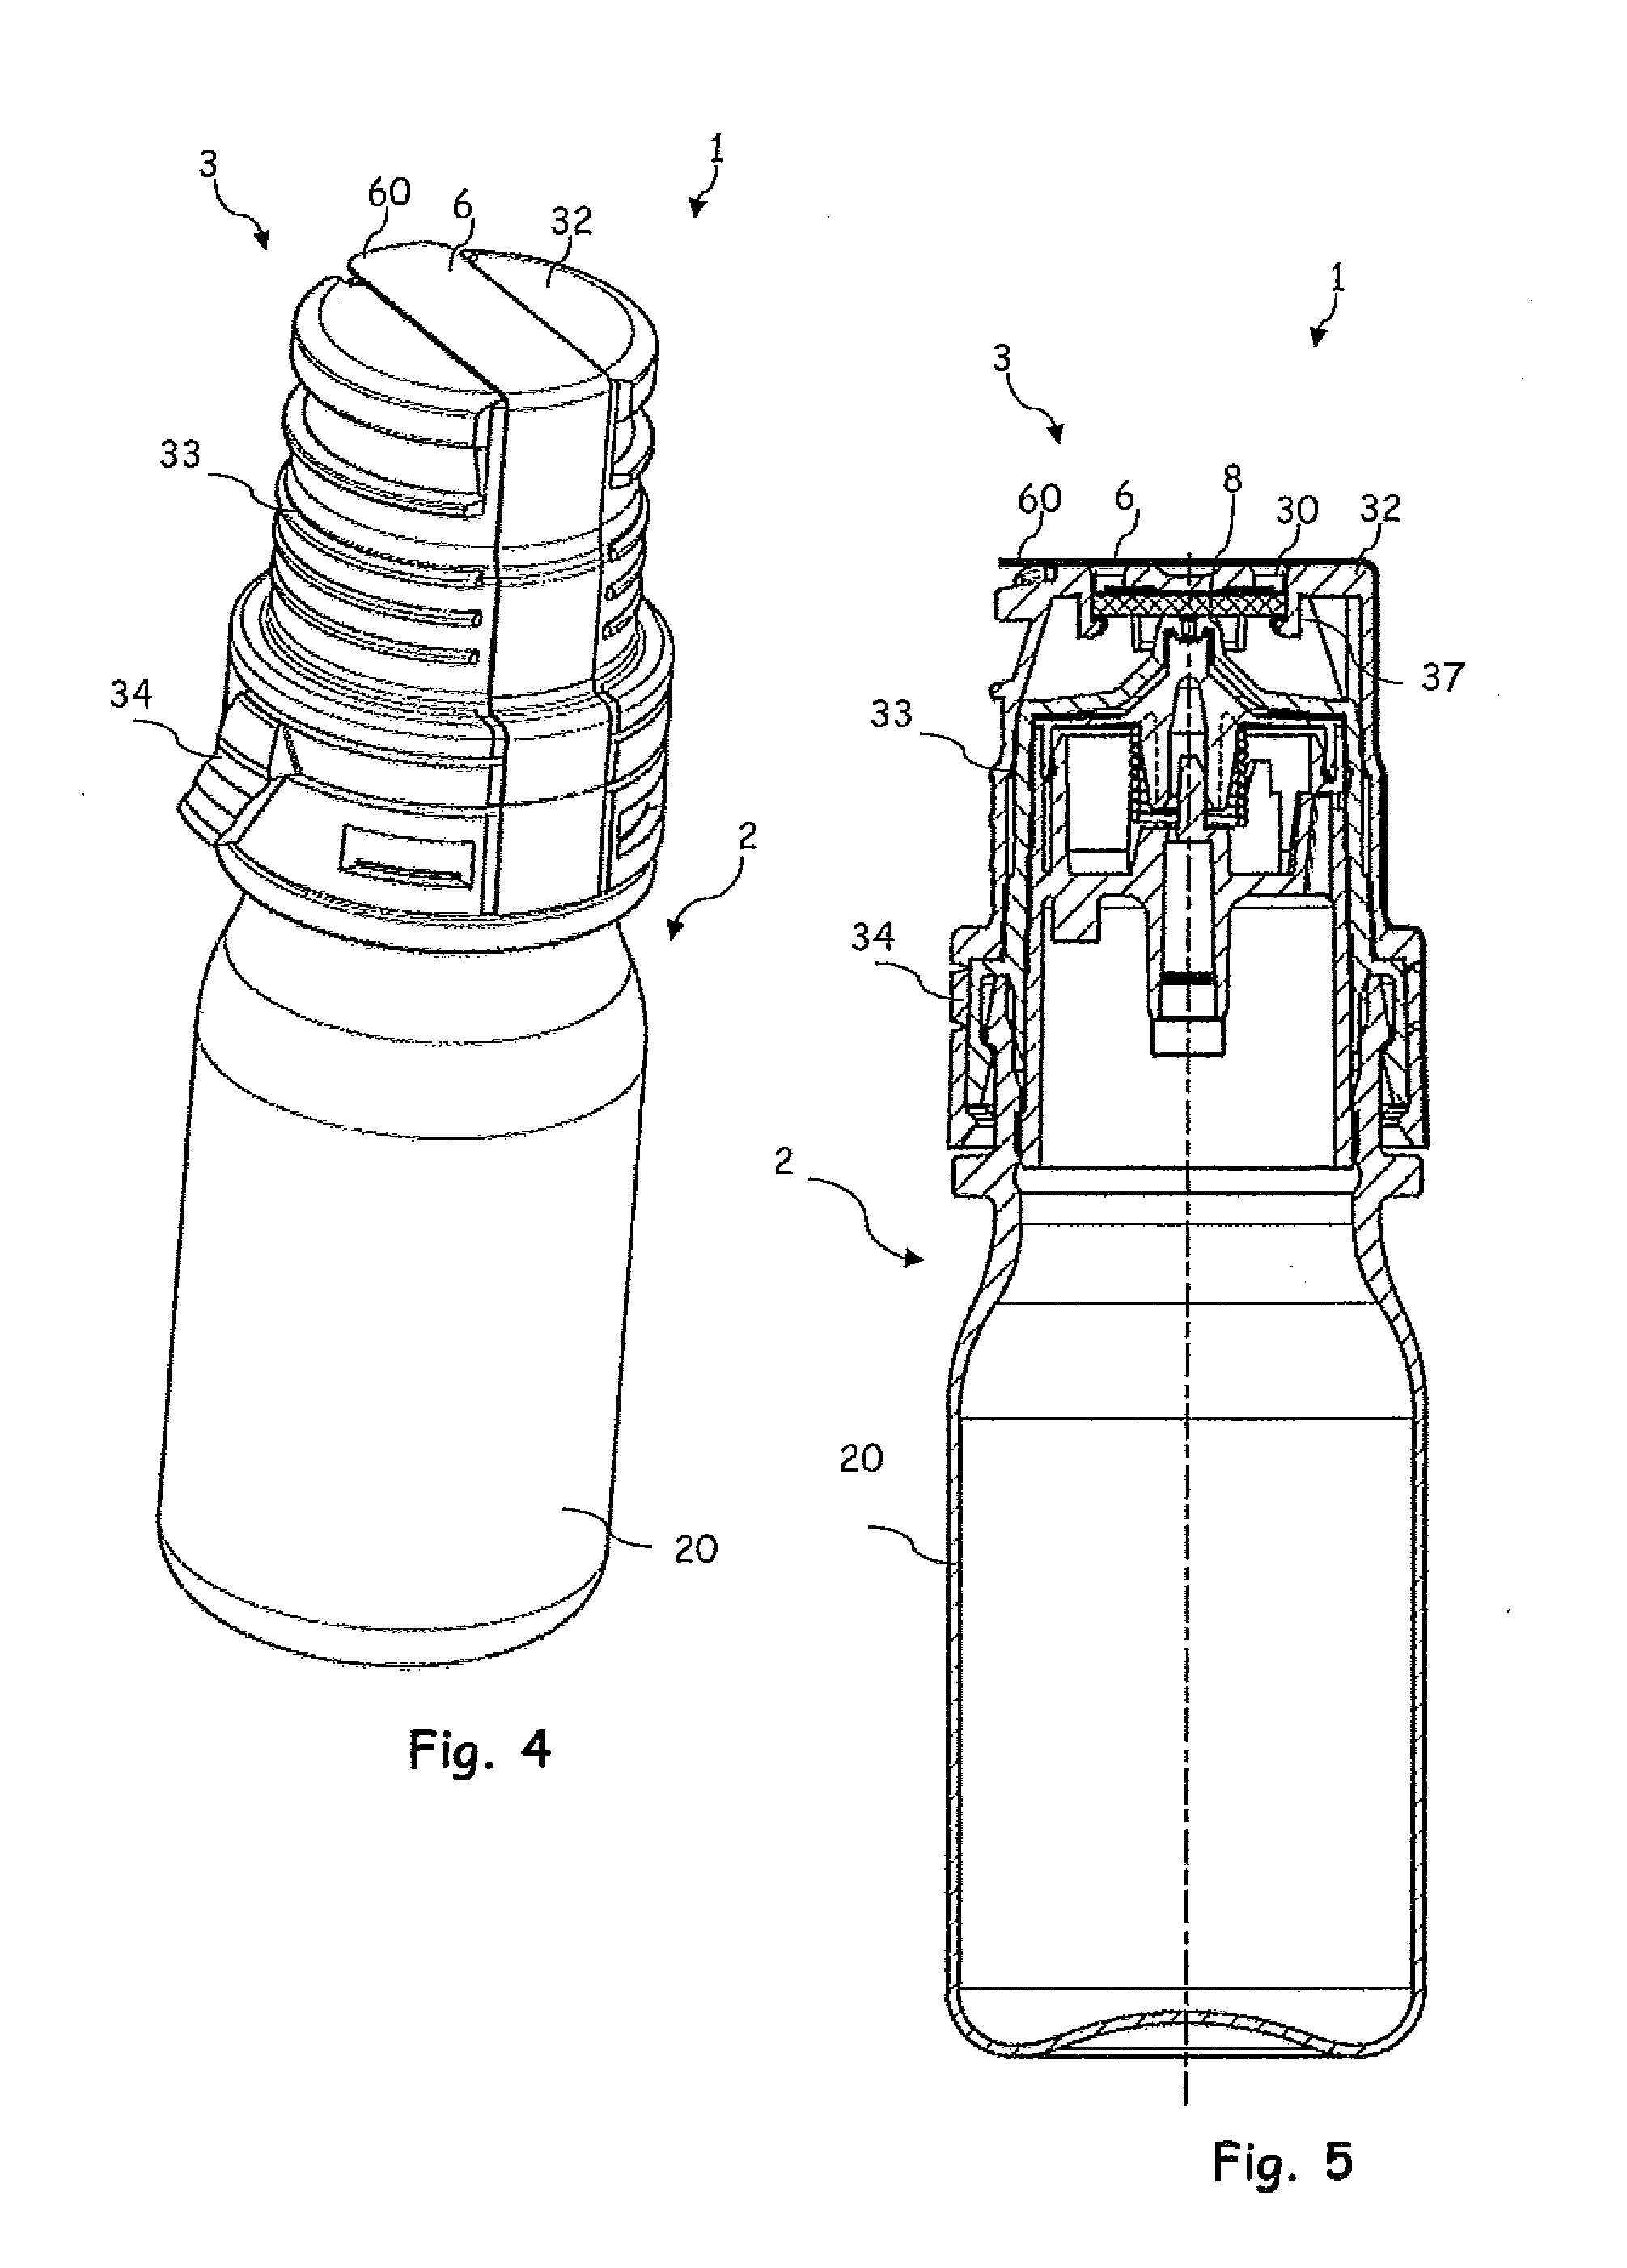 Protective cap for a dispenser and dispenser for discharging pharmaceutical and/or cosmetic liquids